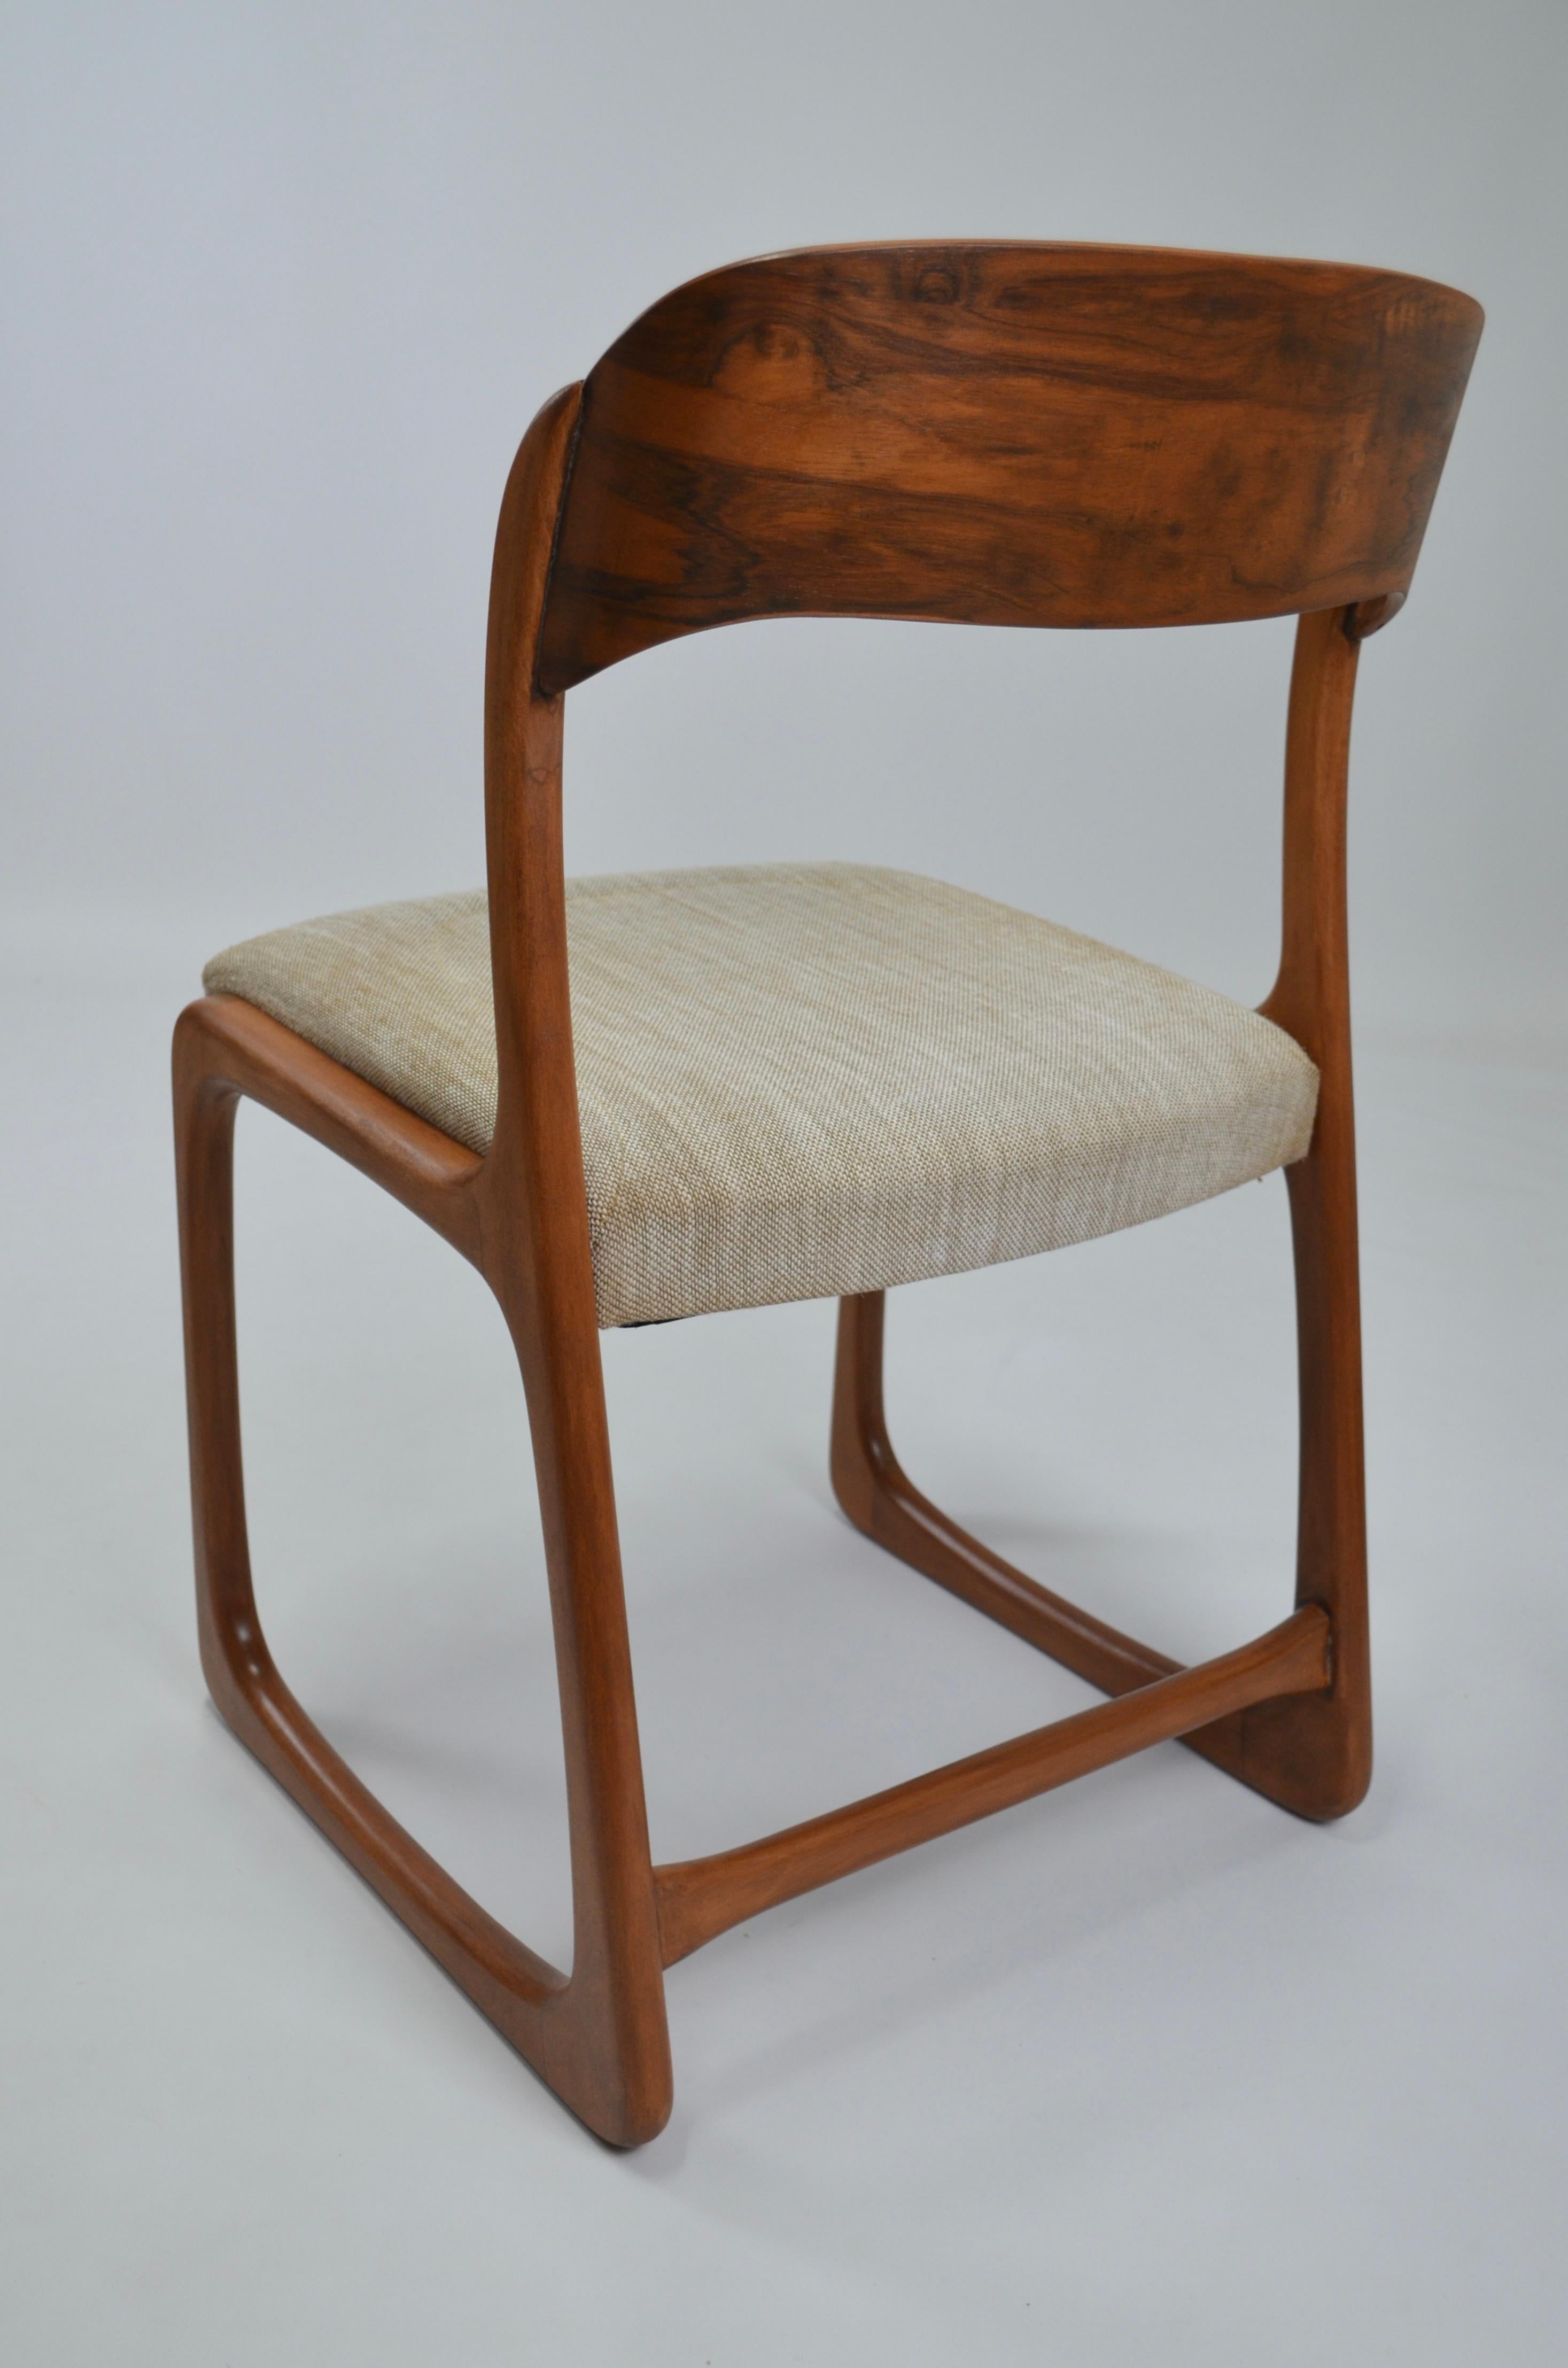 Vintage French Traineau or Sleigh Dining Chairs, Baumann, France, 60s For Sale 11